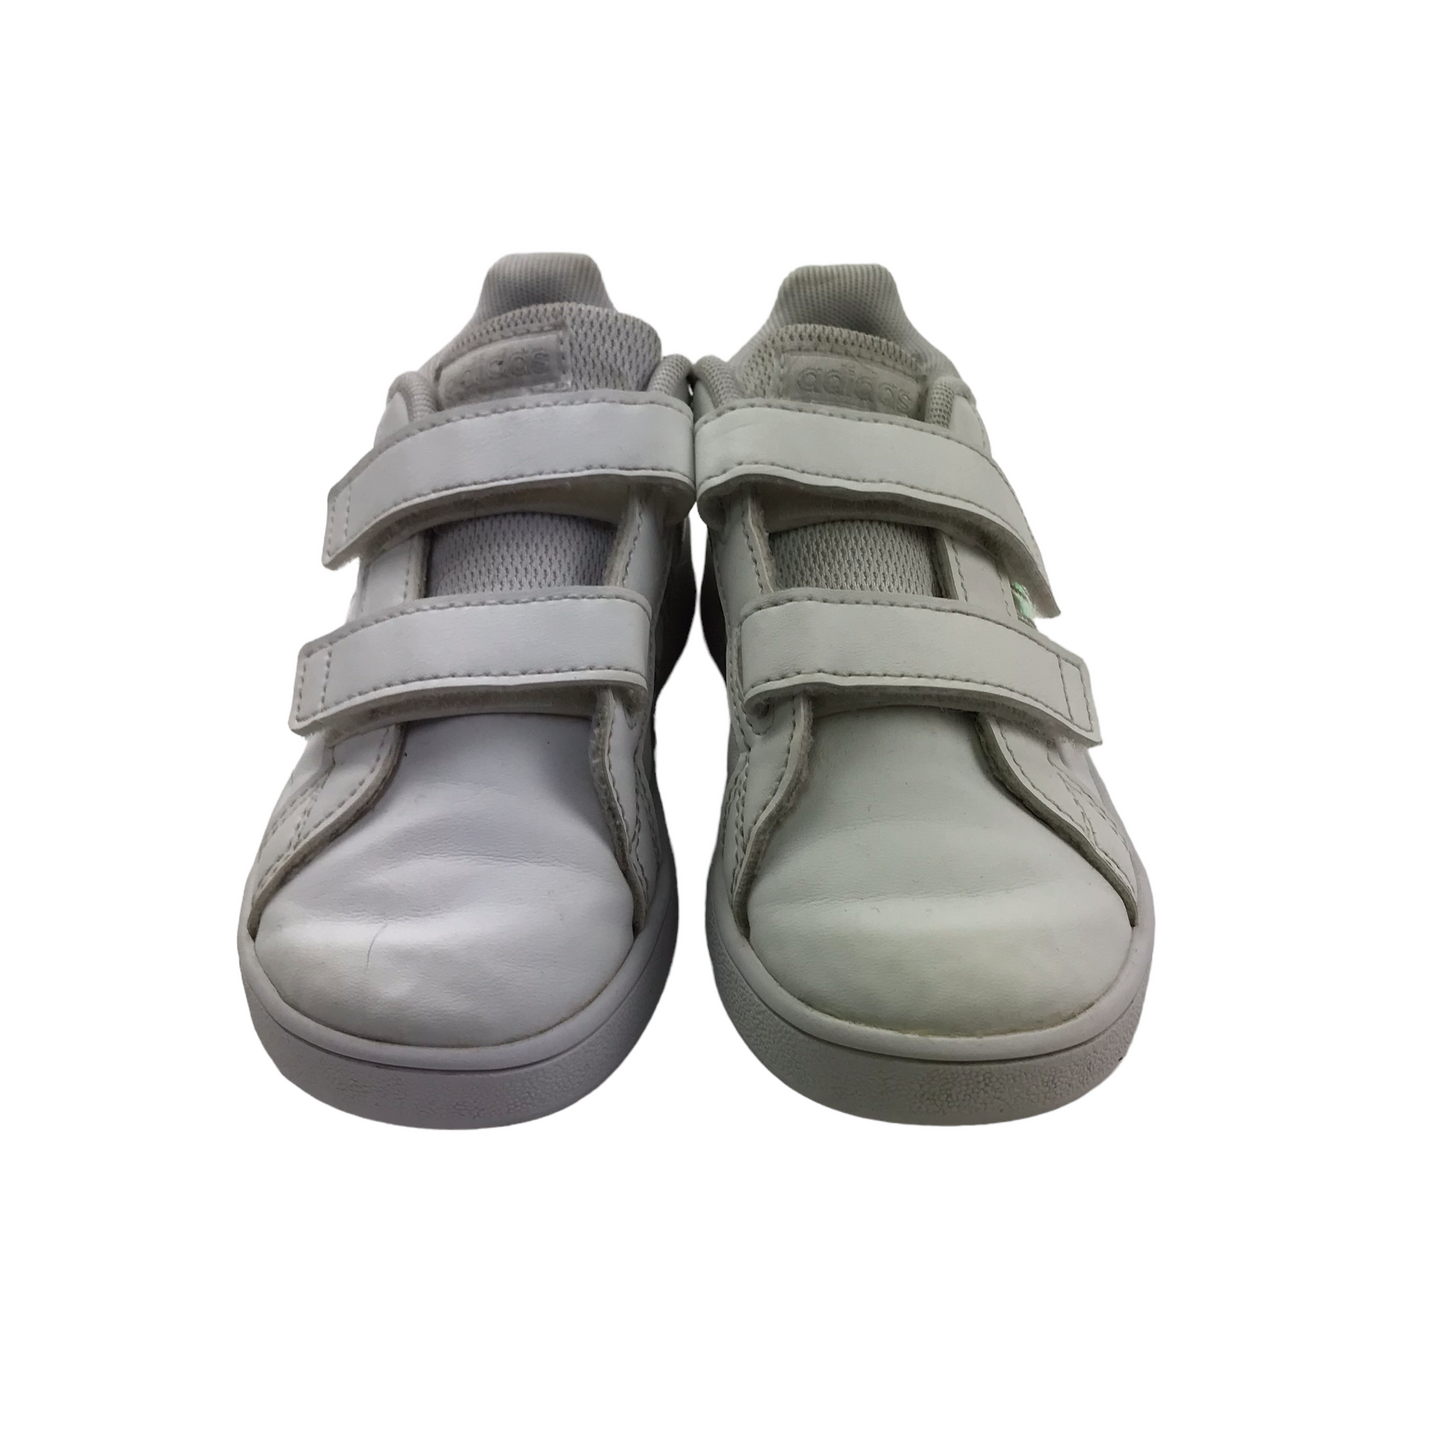 Adidas White and Metallized Detail Trainers Shoe Size 8.5K junior